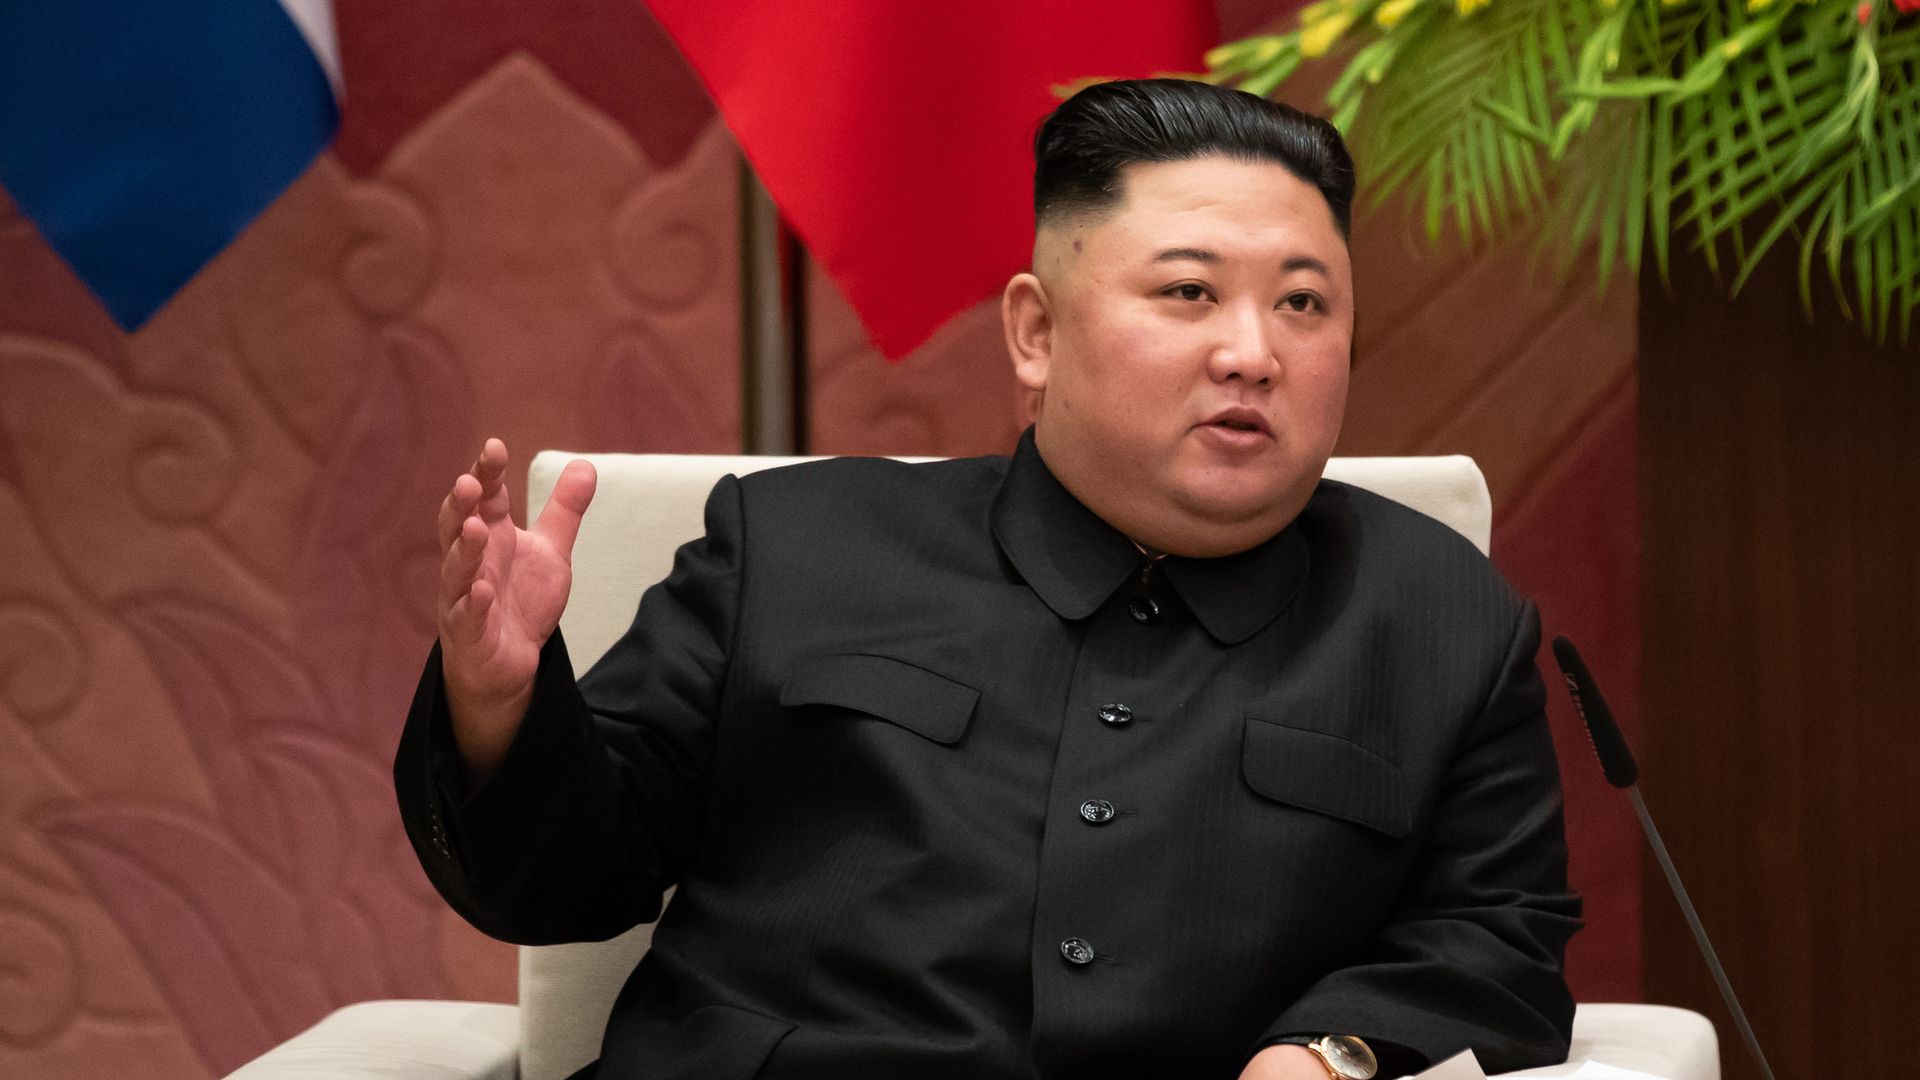 Photo of Kim Jong-un in a black outfit gesturing with his hand as he speaks